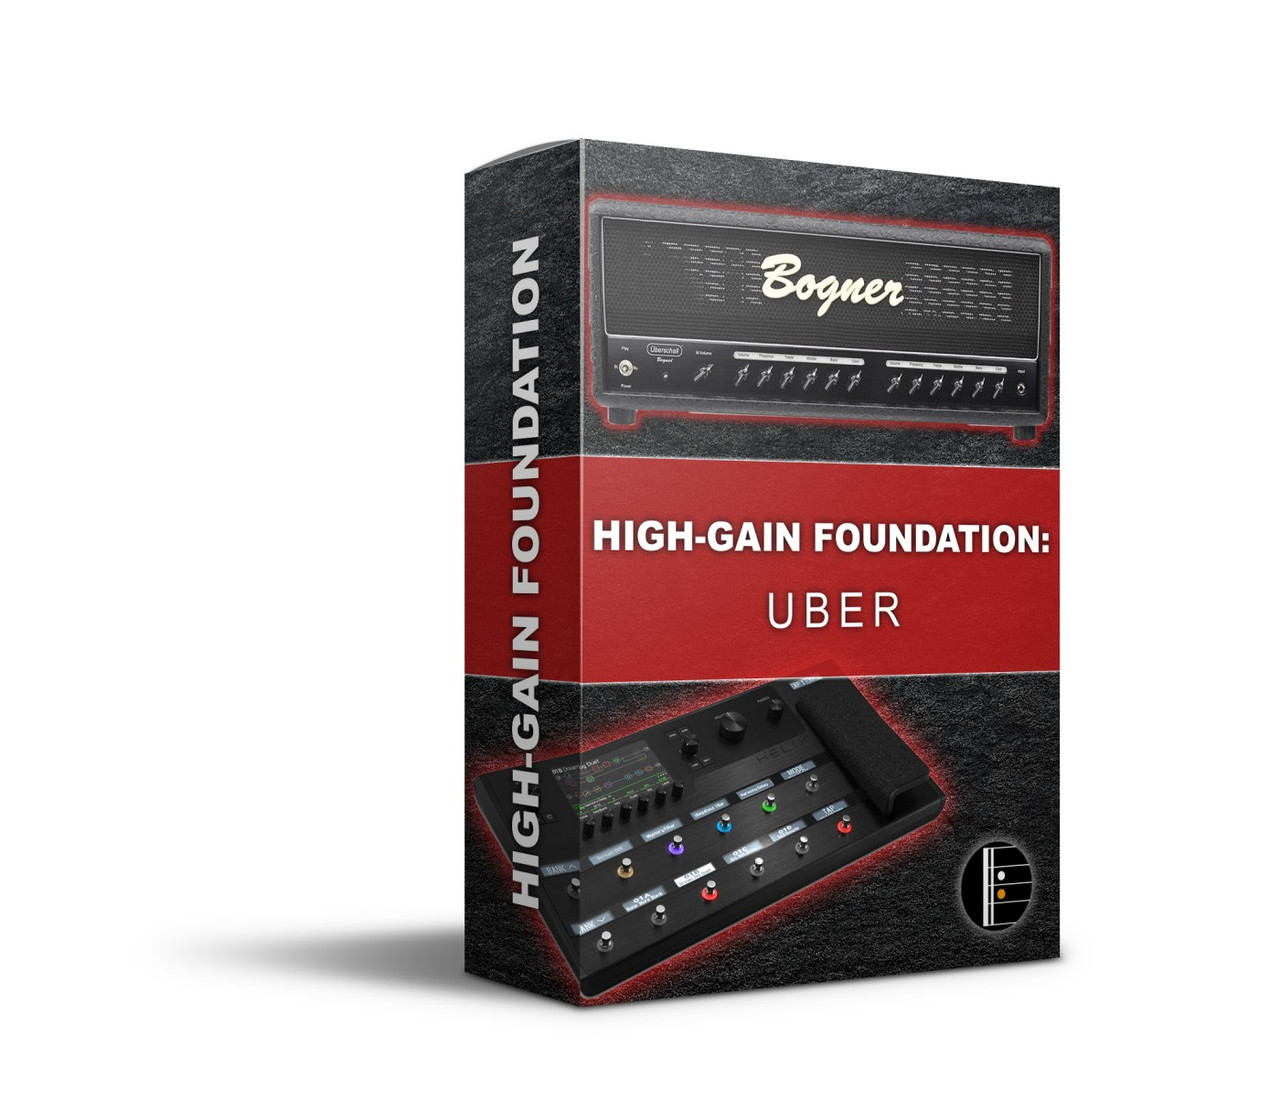 THE HIGH-GAIN FOUNDATION: Based on the Bogner Uberschall